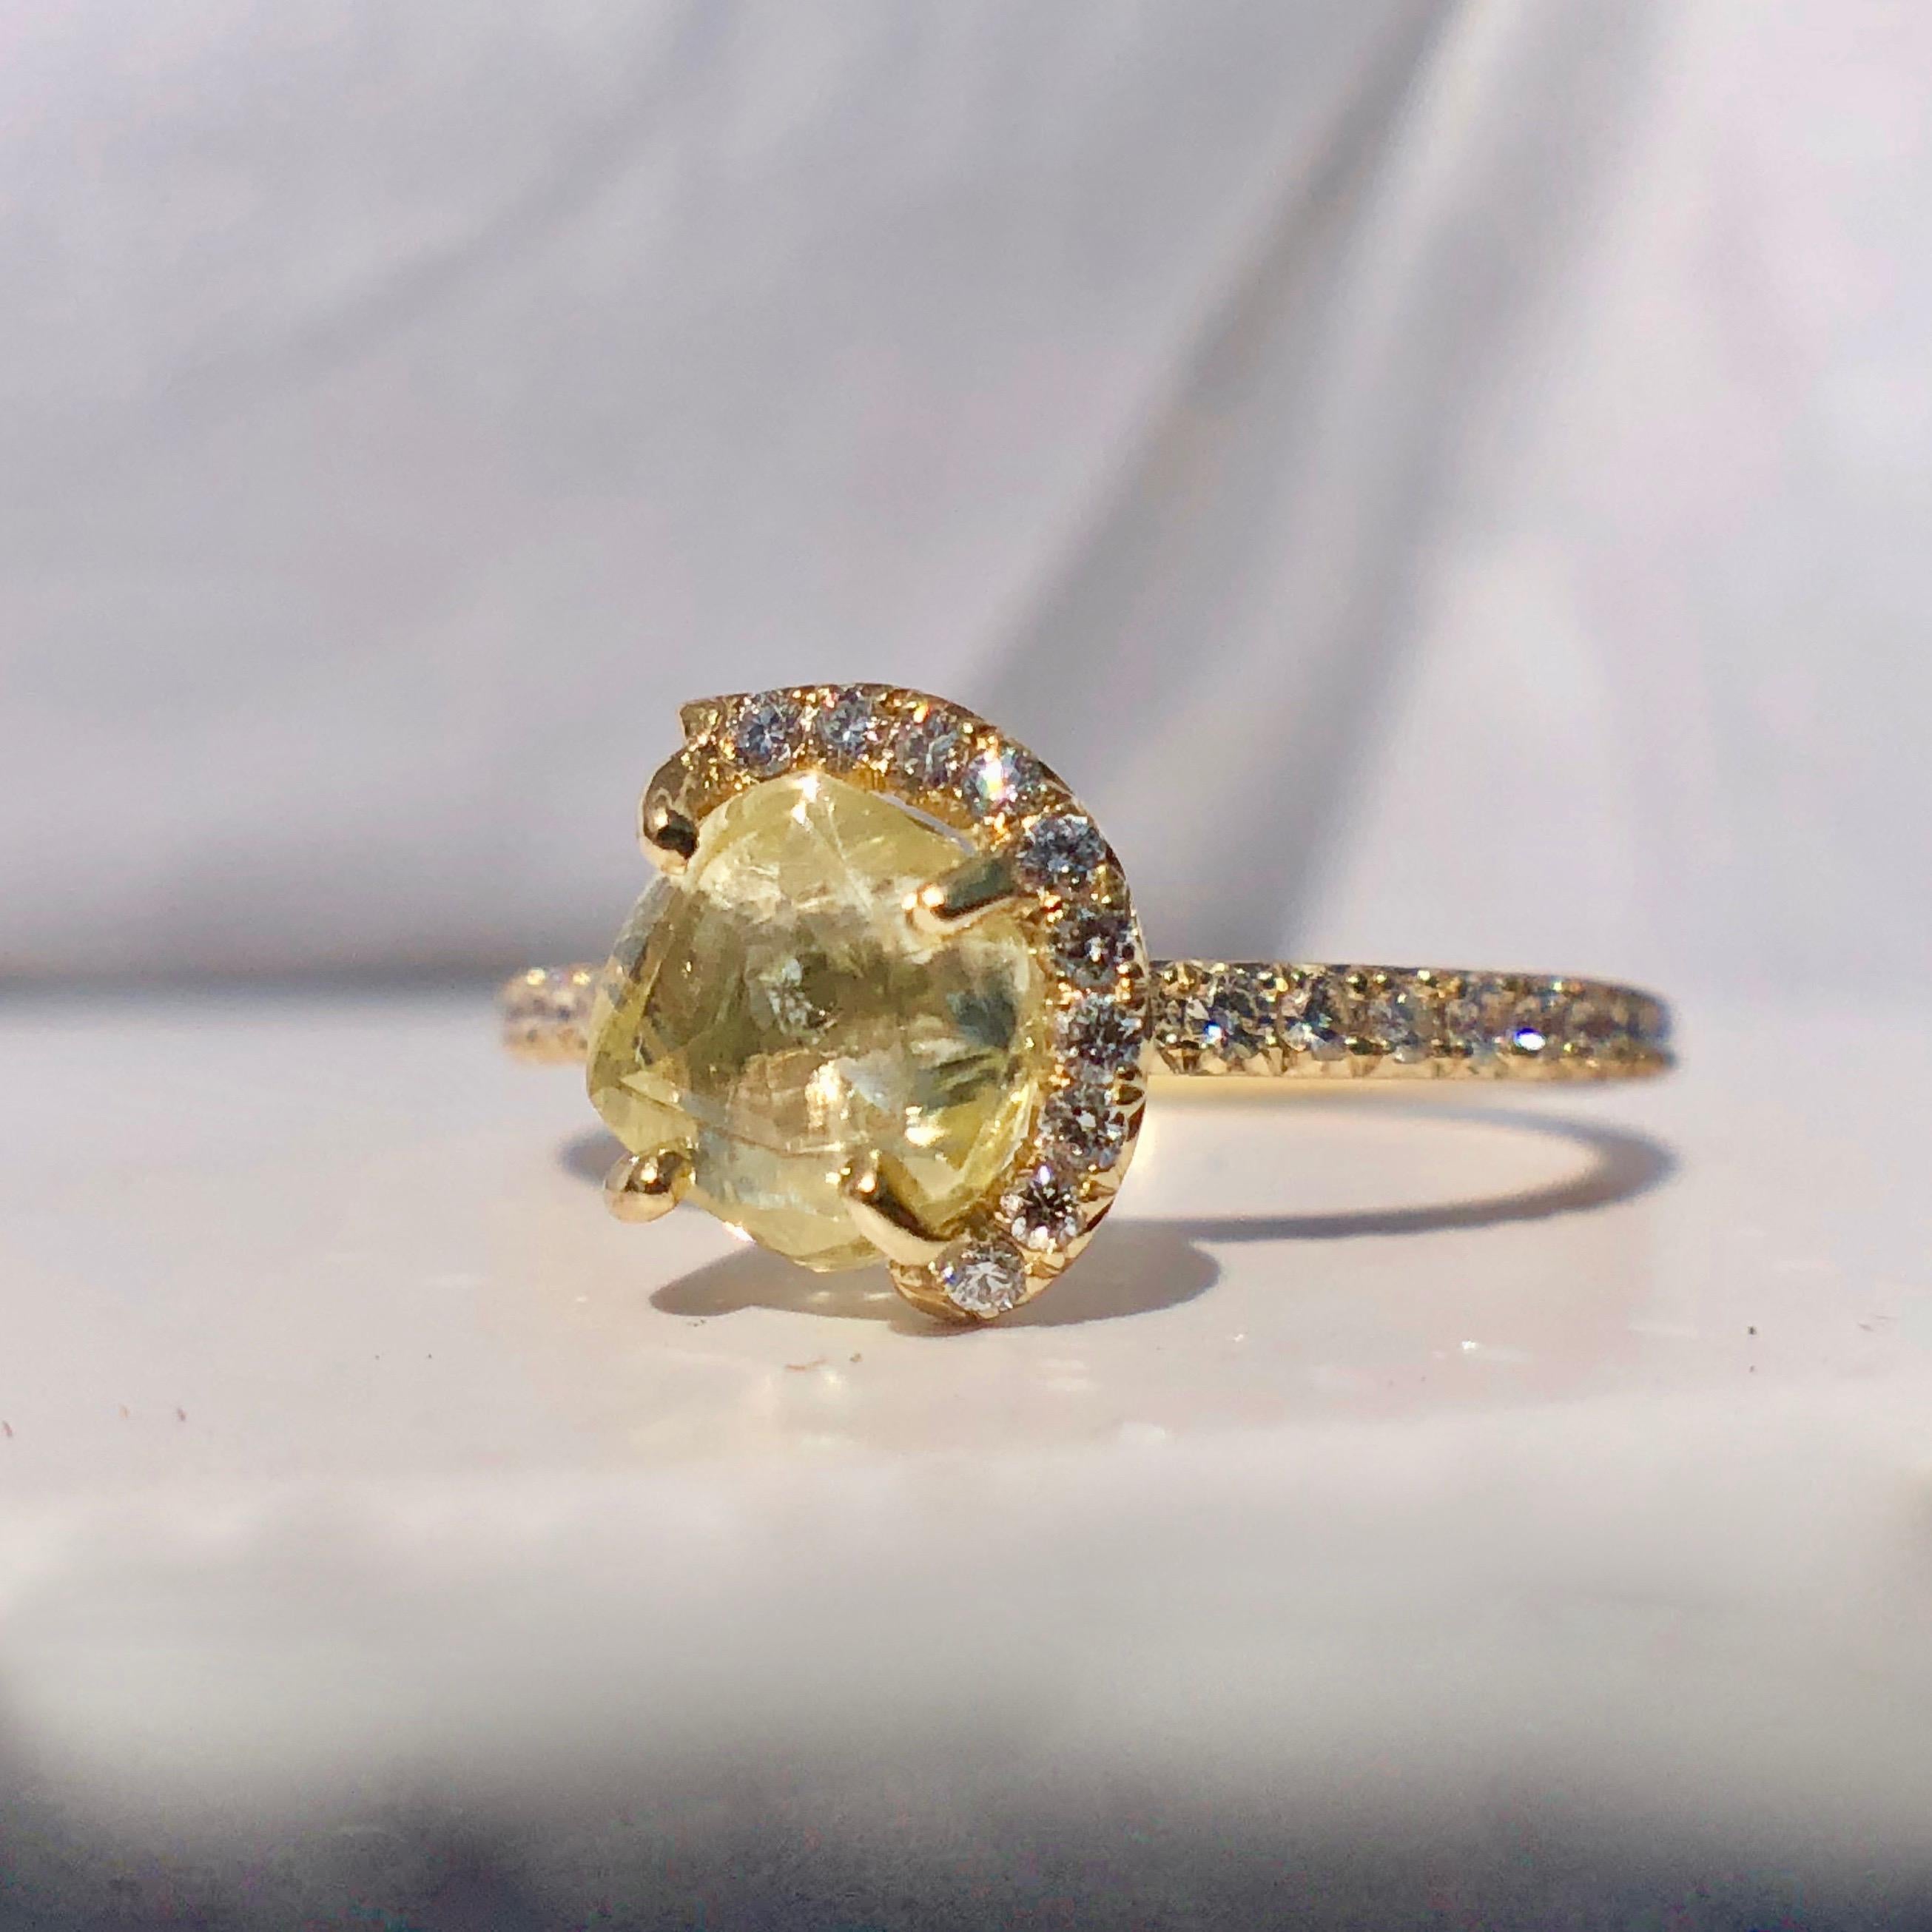 A yellow diamond ring with round brilliant cut halo and shoulders by the company 'diamonds in the rough' 

Based on current similar items sold by the company we recommend insuring this piece for $10,000
Rough diamonds are revered for their pure,